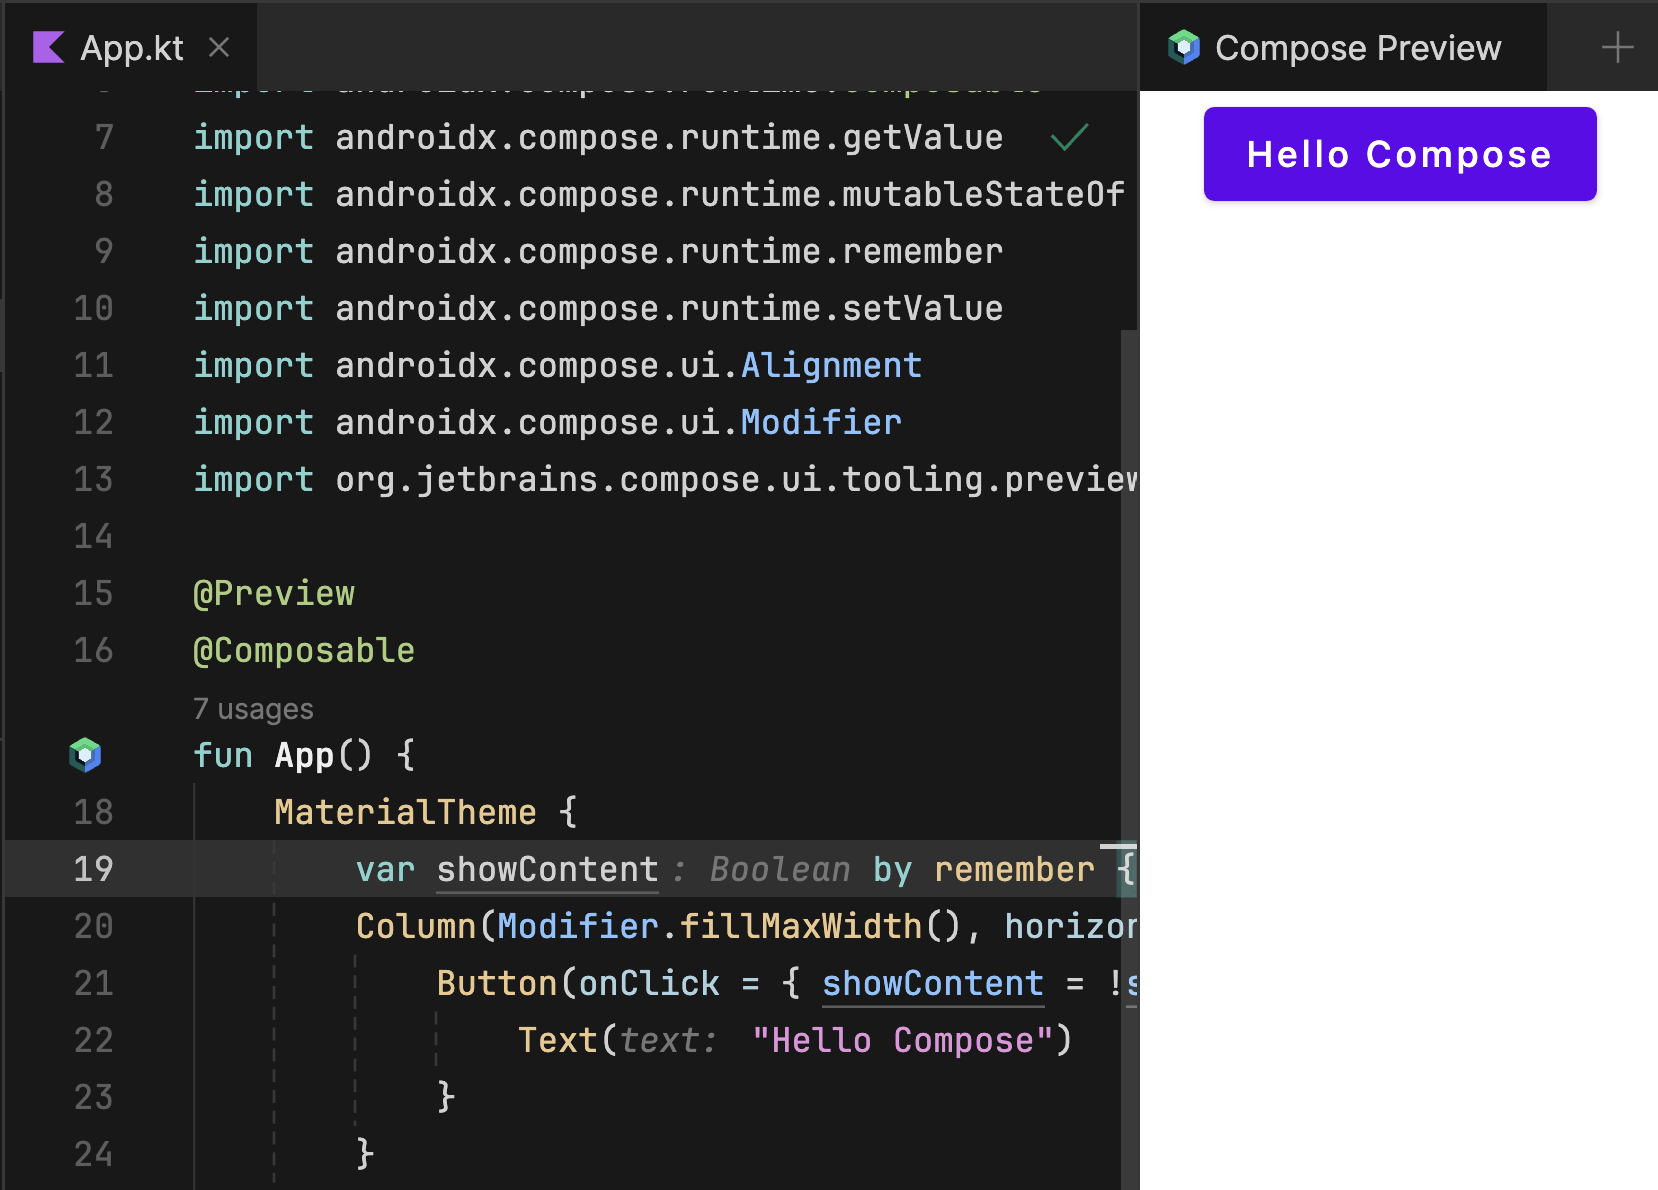 Annotated composable function with a preview built in the Compose Preview tool window.